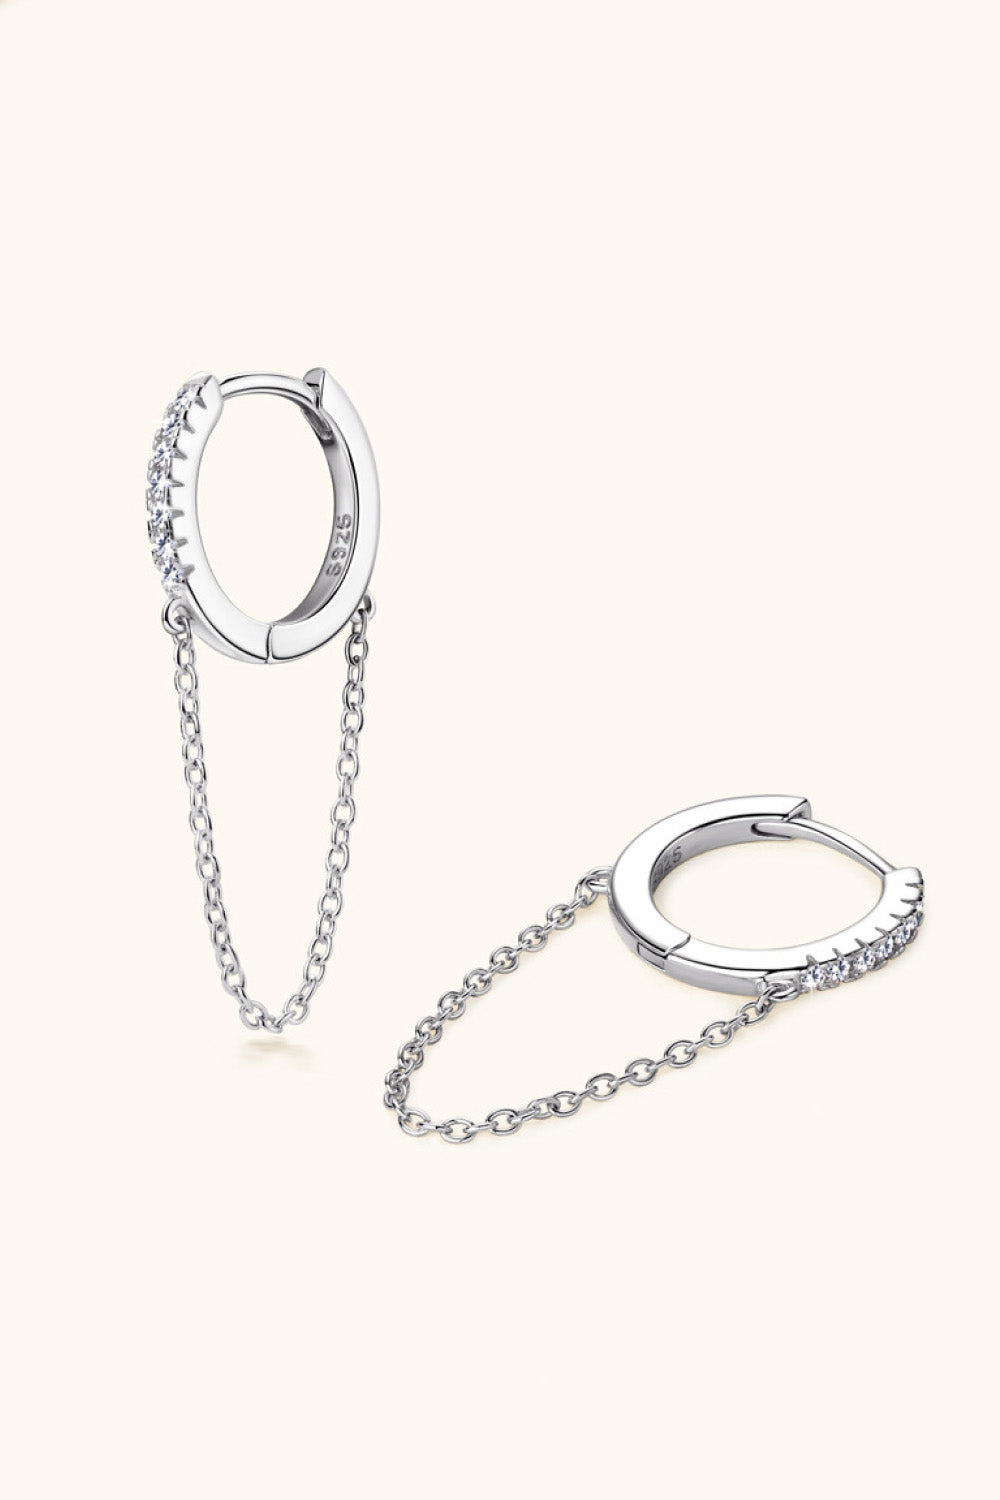 Moissanite 925 Sterling Silver Huggie Earrings with Chain-Earrings-Inspired by Justeen-Women's Clothing Boutique in Chicago, Illinois